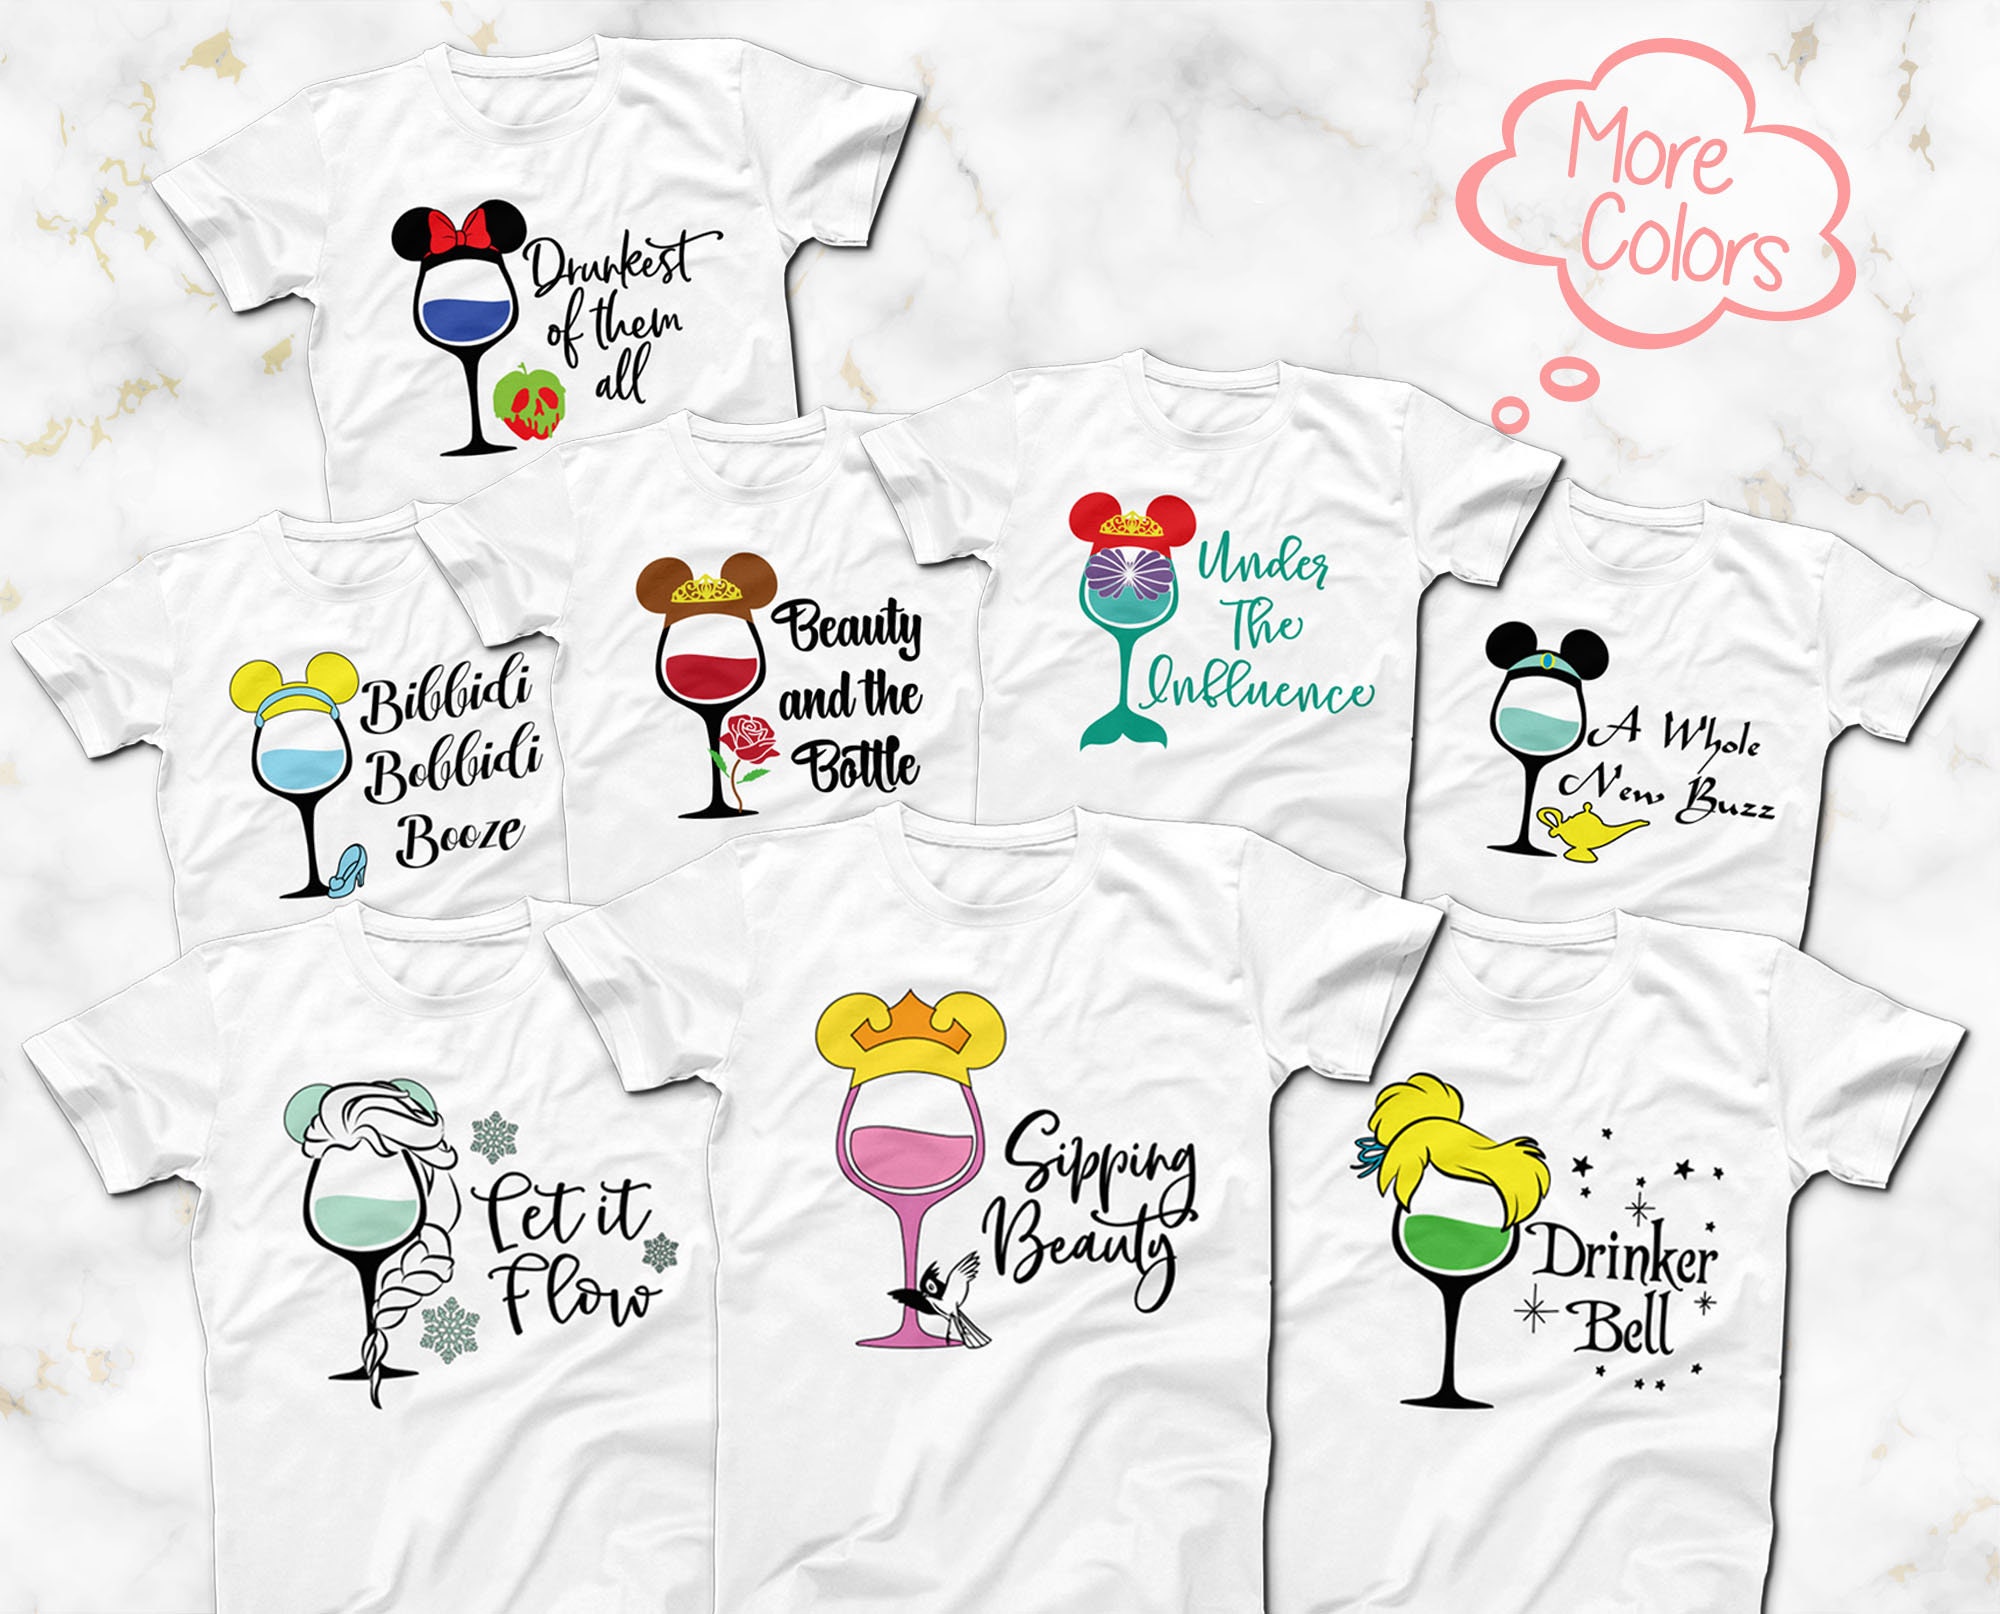 Drunkest Of Them All Disney Wine HTV and Sublimation Prints